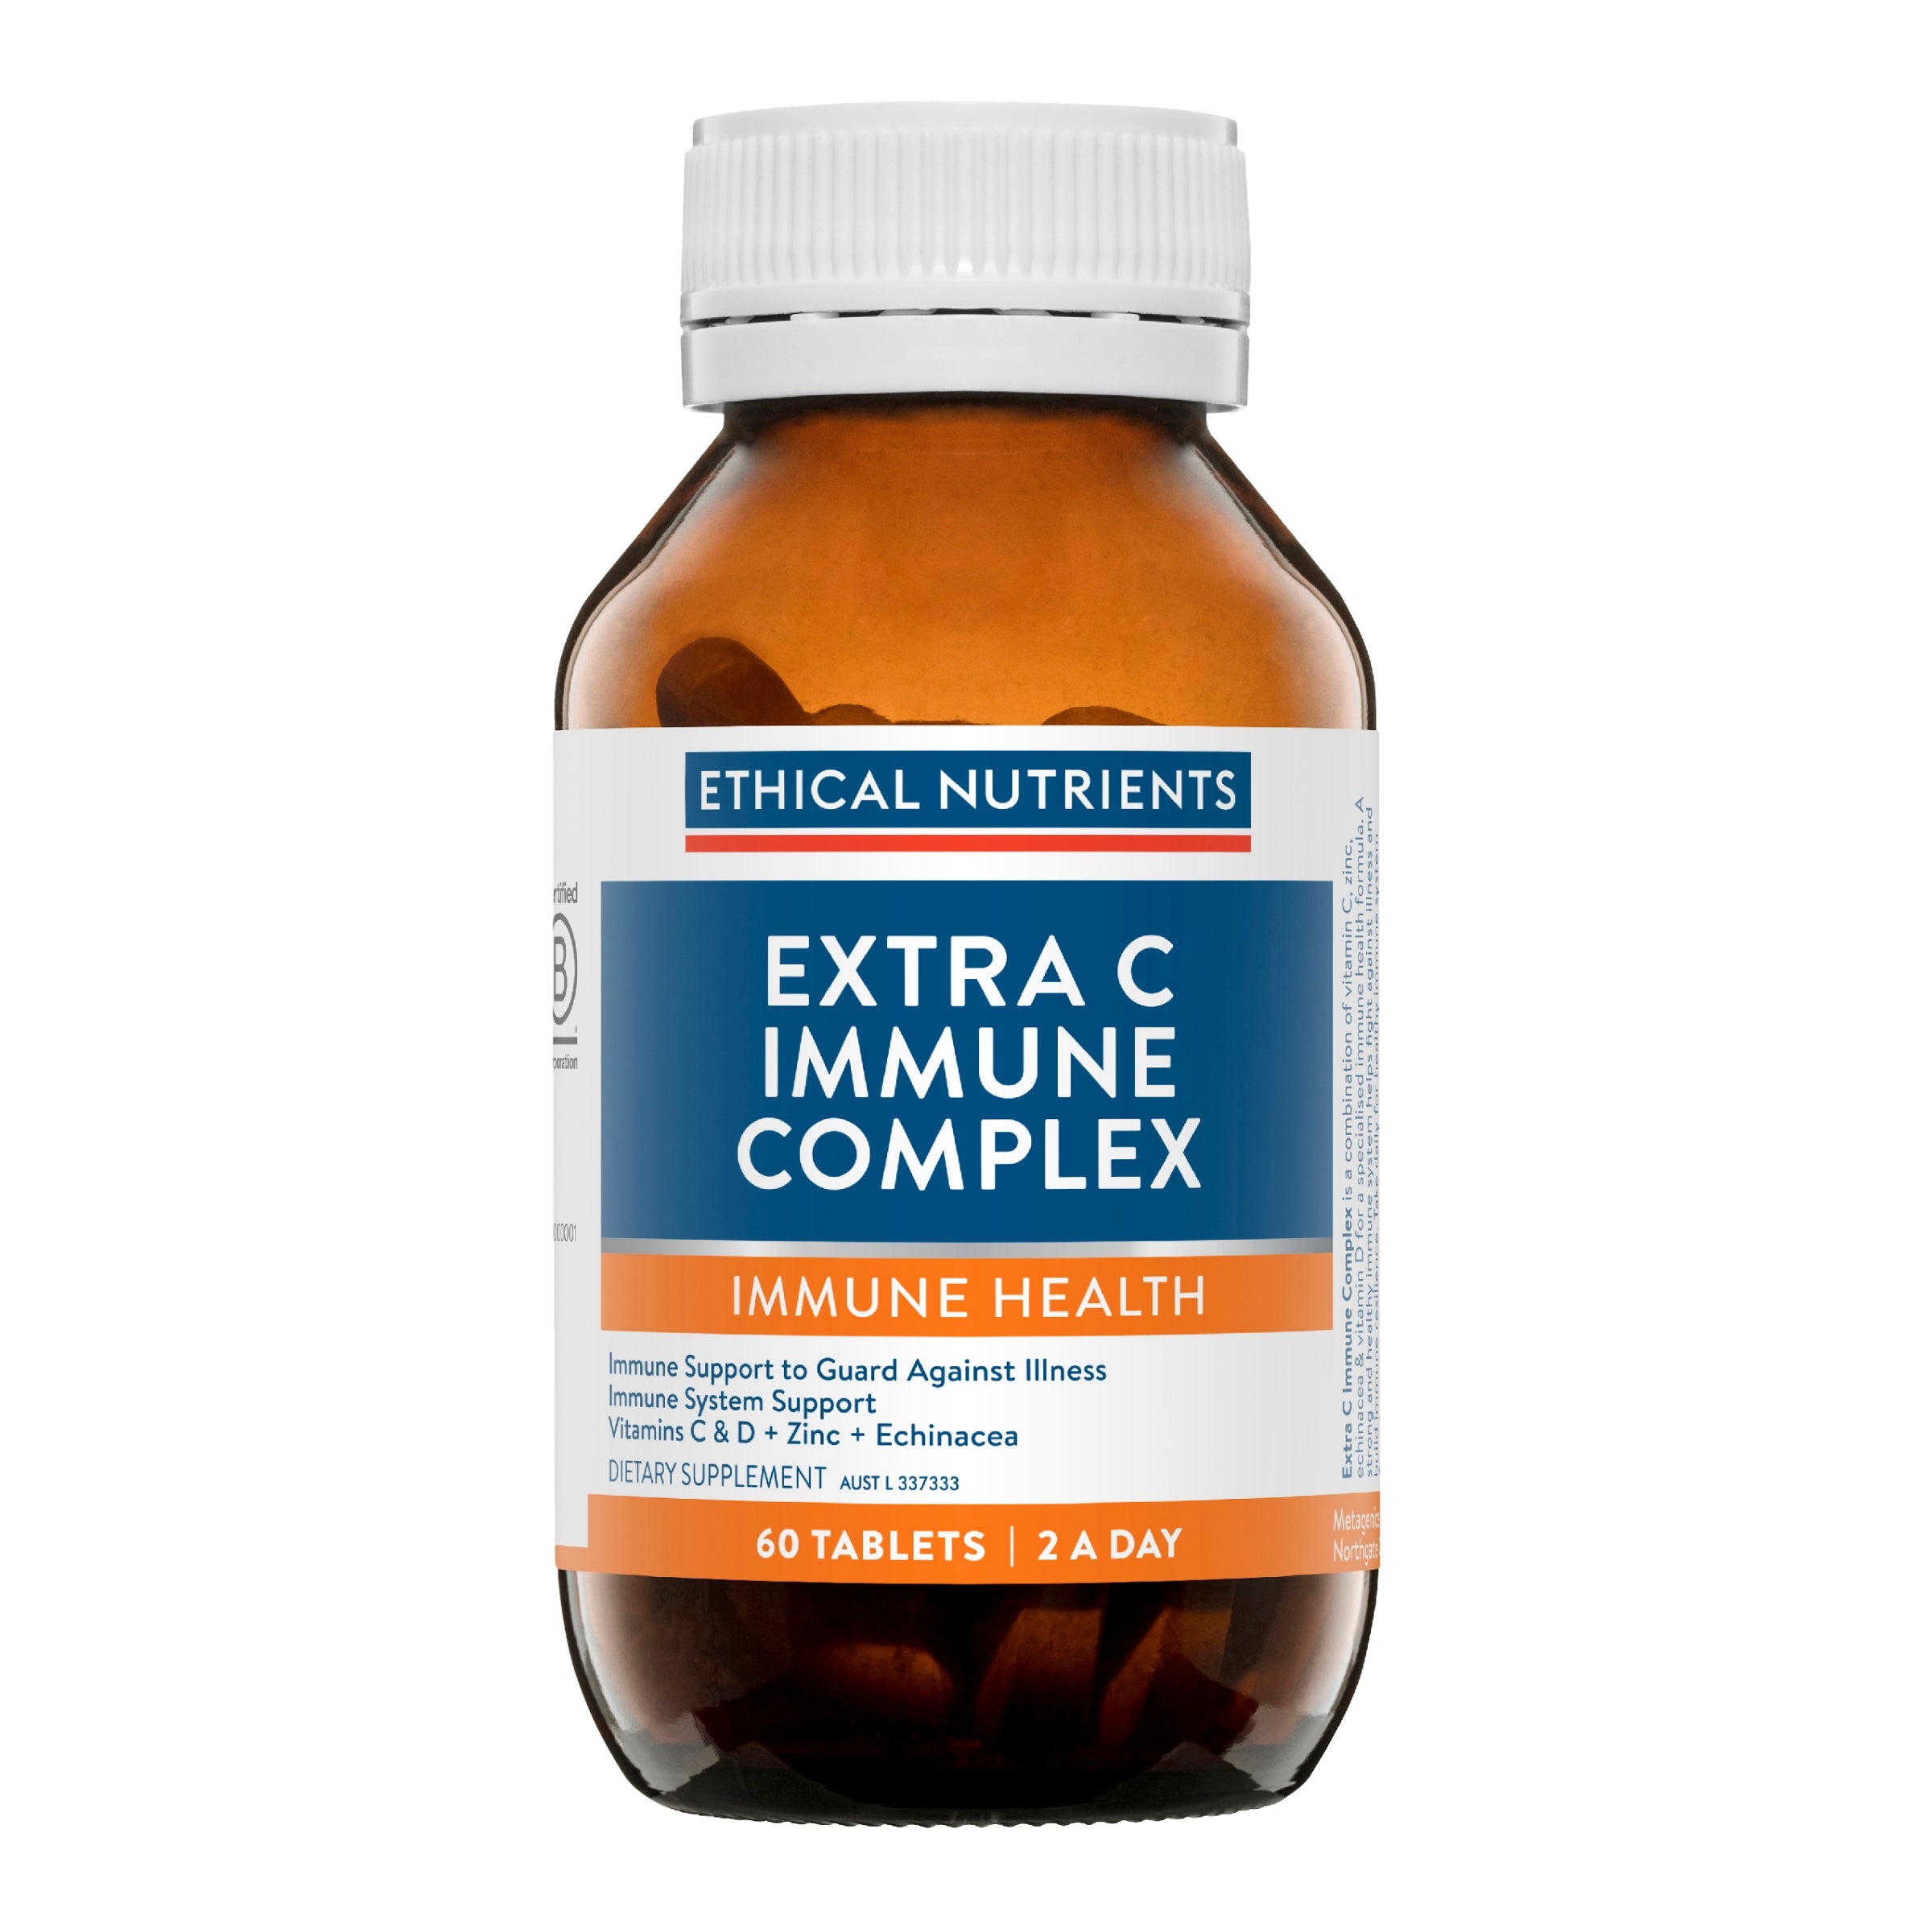 Ethical Nutrients Extra C Immune Complex 60 Tablets #size_60 tablets